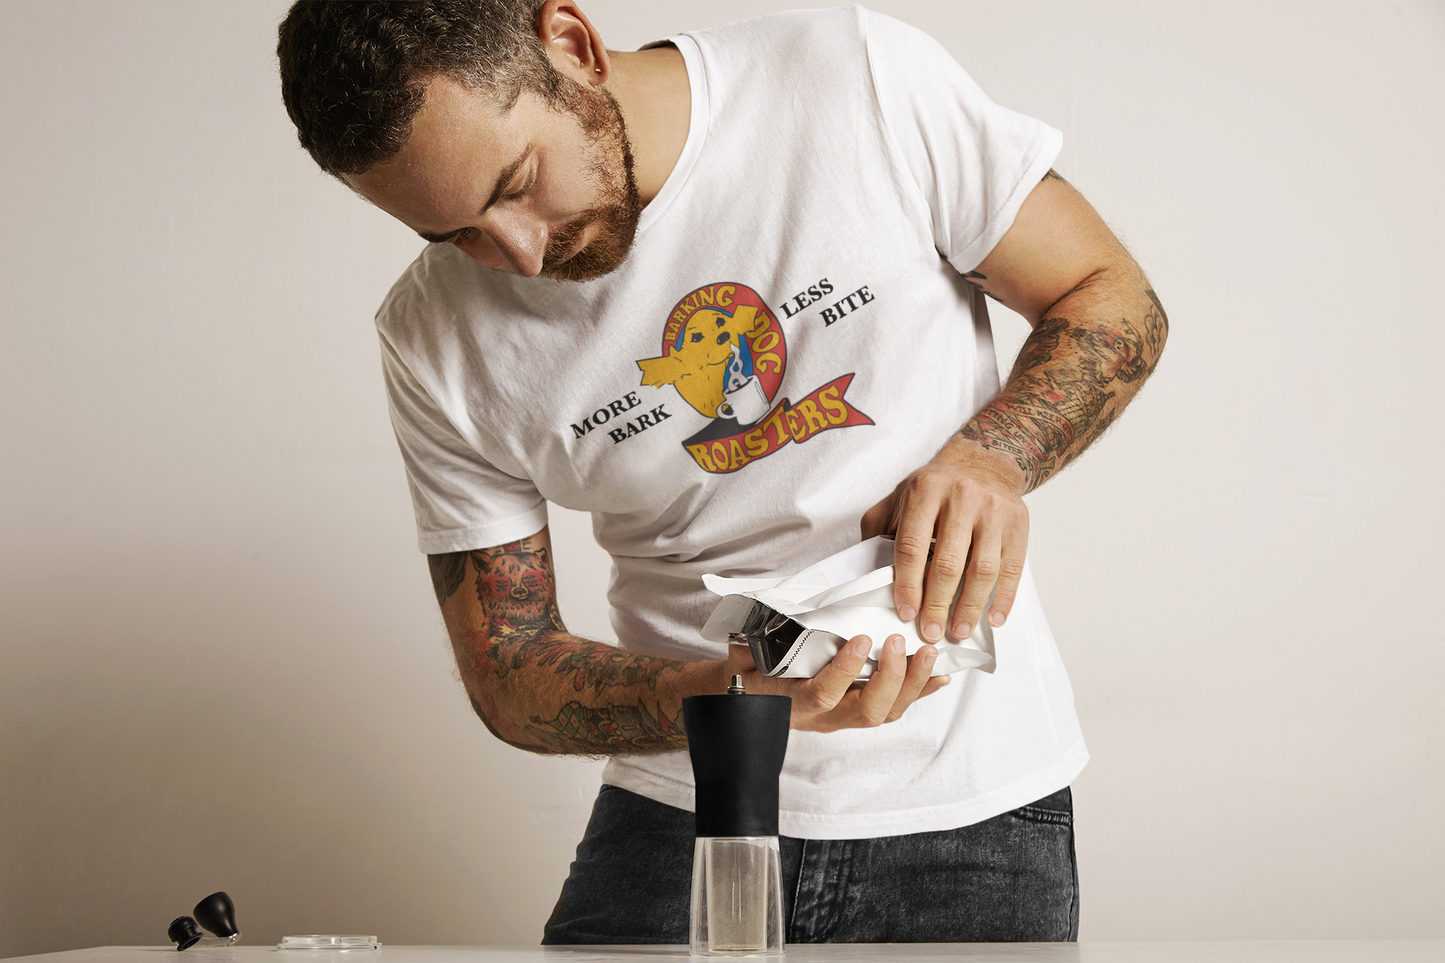 Classic Logo Tee - Barking Dog Roasters Man Pouring coffee into hand grinder wearing white Logo tee